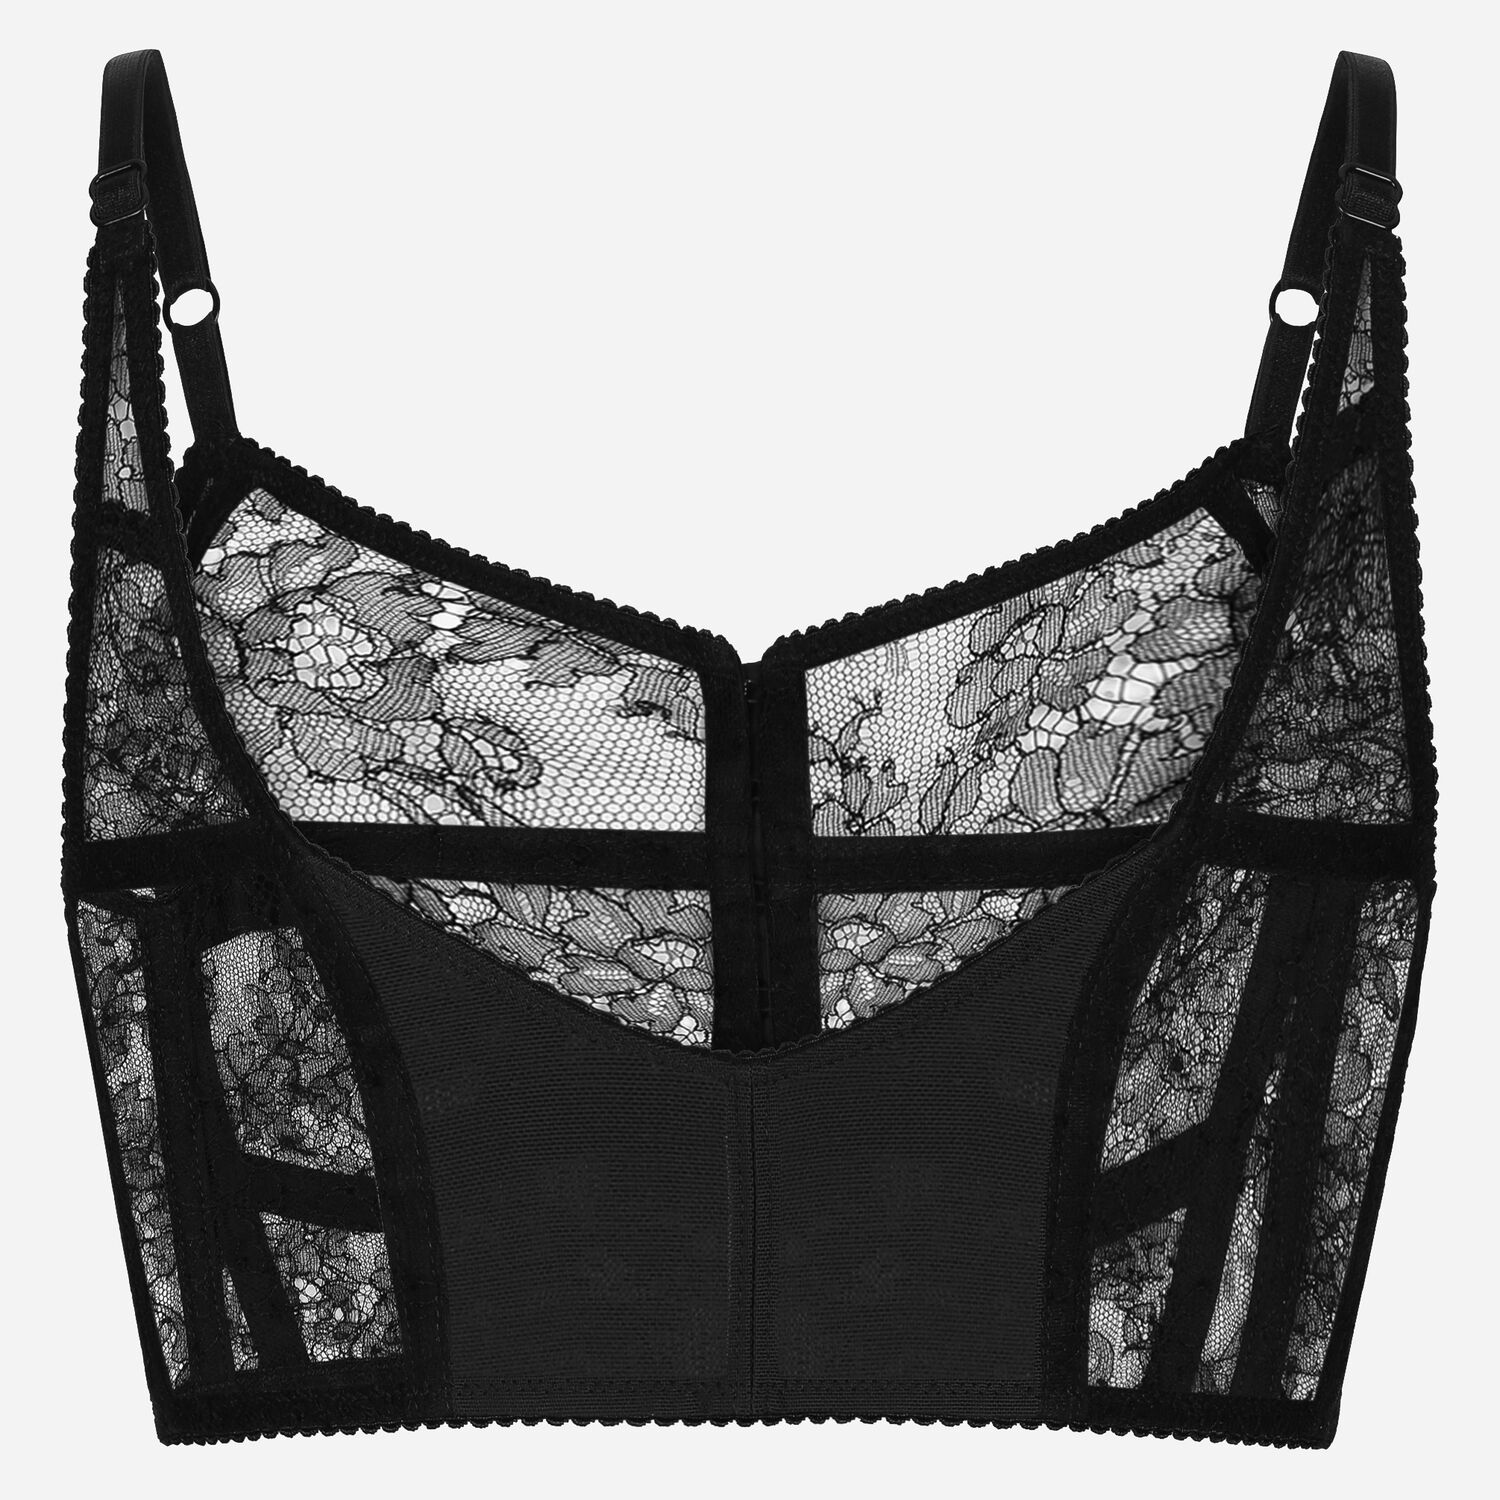 Lace lingerie bustier with straps in Black for | Dolce&Gabbana® US